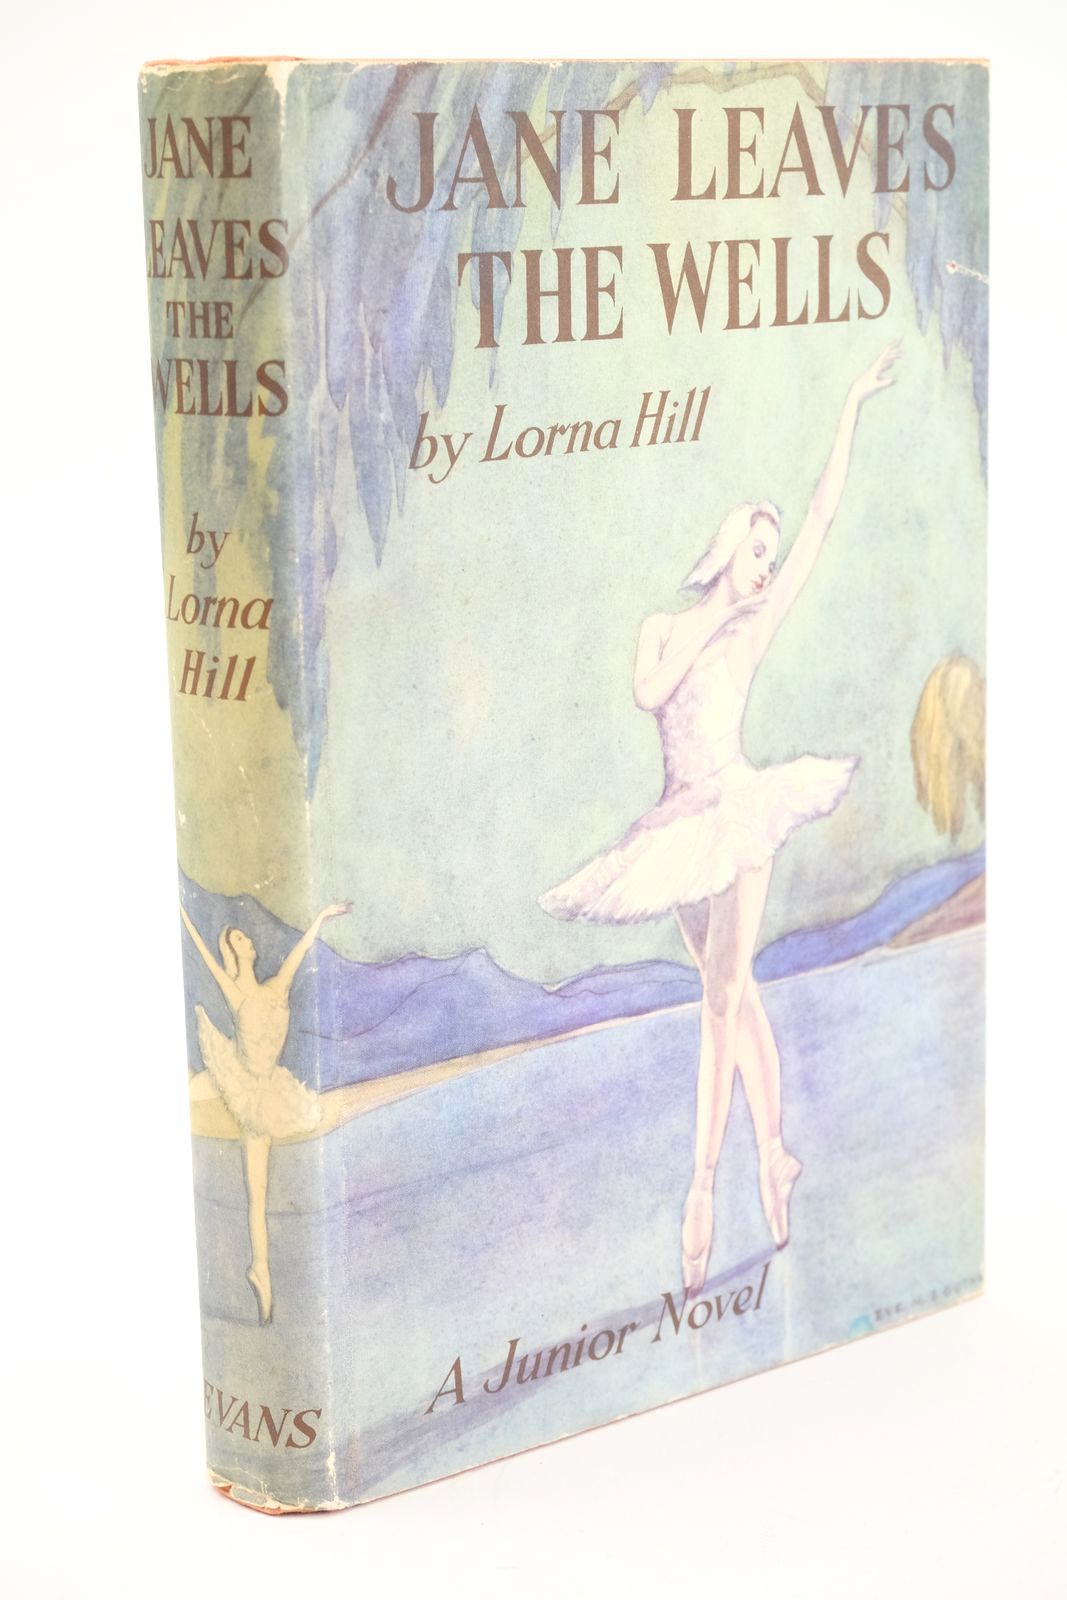 Photo of JANE LEAVES THE WELLS written by Hill, Lorna illustrated by Guthrie, Eve published by Evans Brothers Limited (STOCK CODE: 1323909)  for sale by Stella & Rose's Books